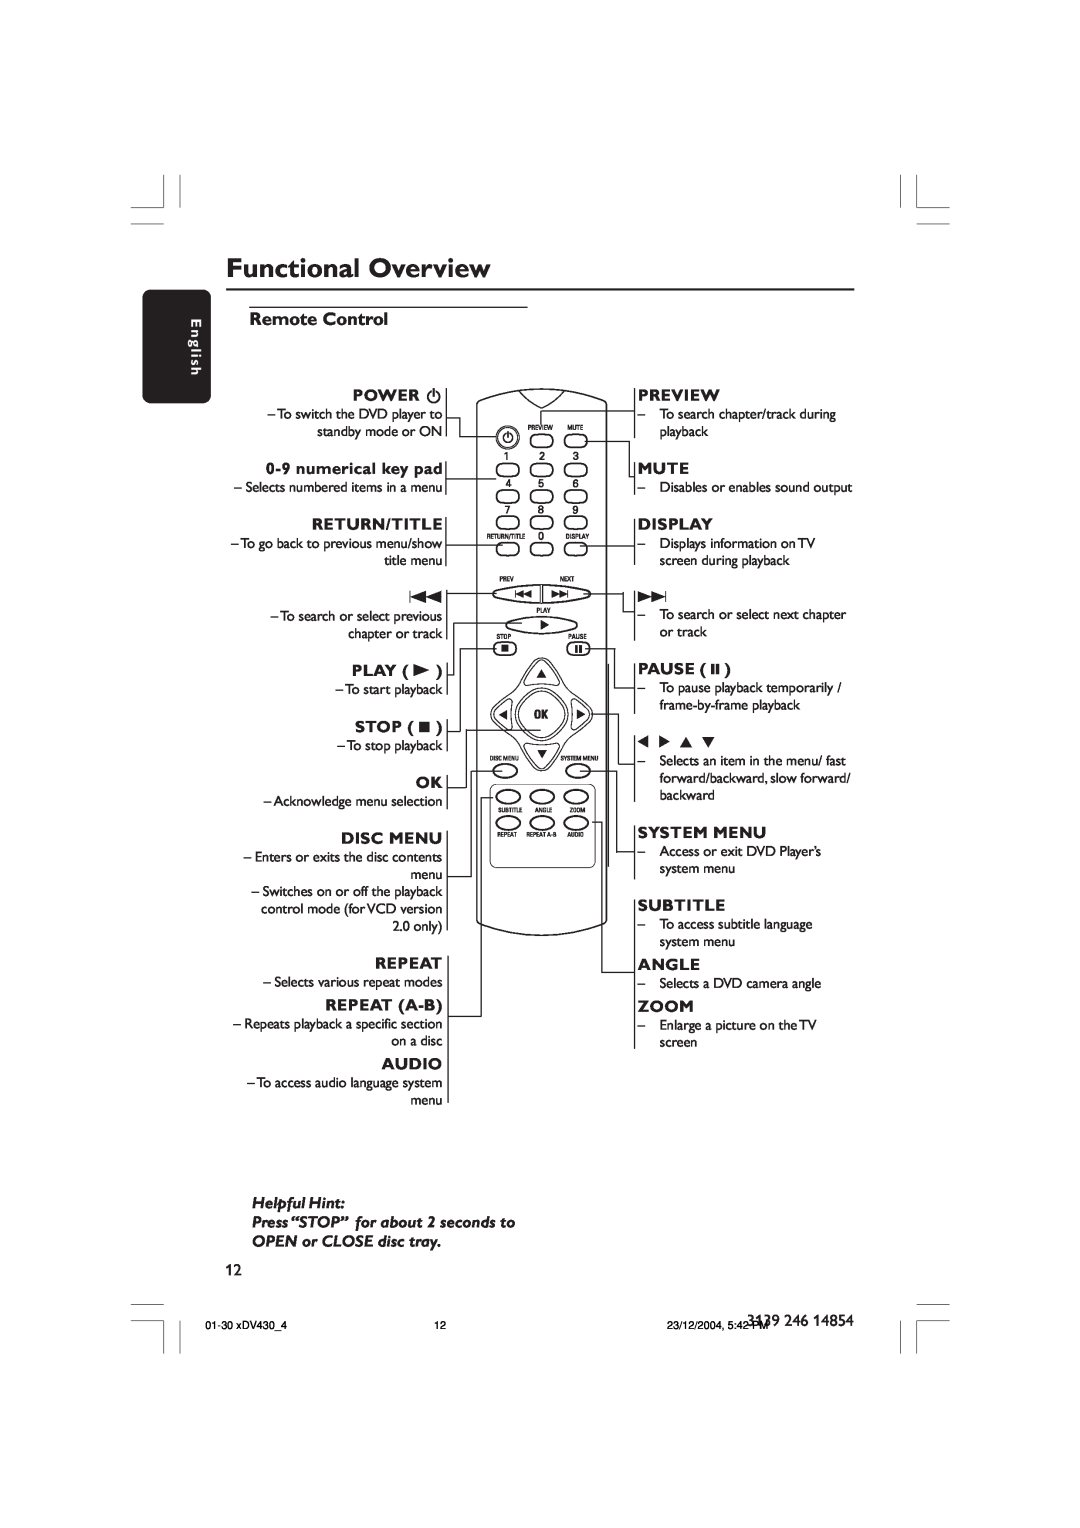 Philips MMS430 user manual Remote Control, Functional Overview, Helpful Hint 